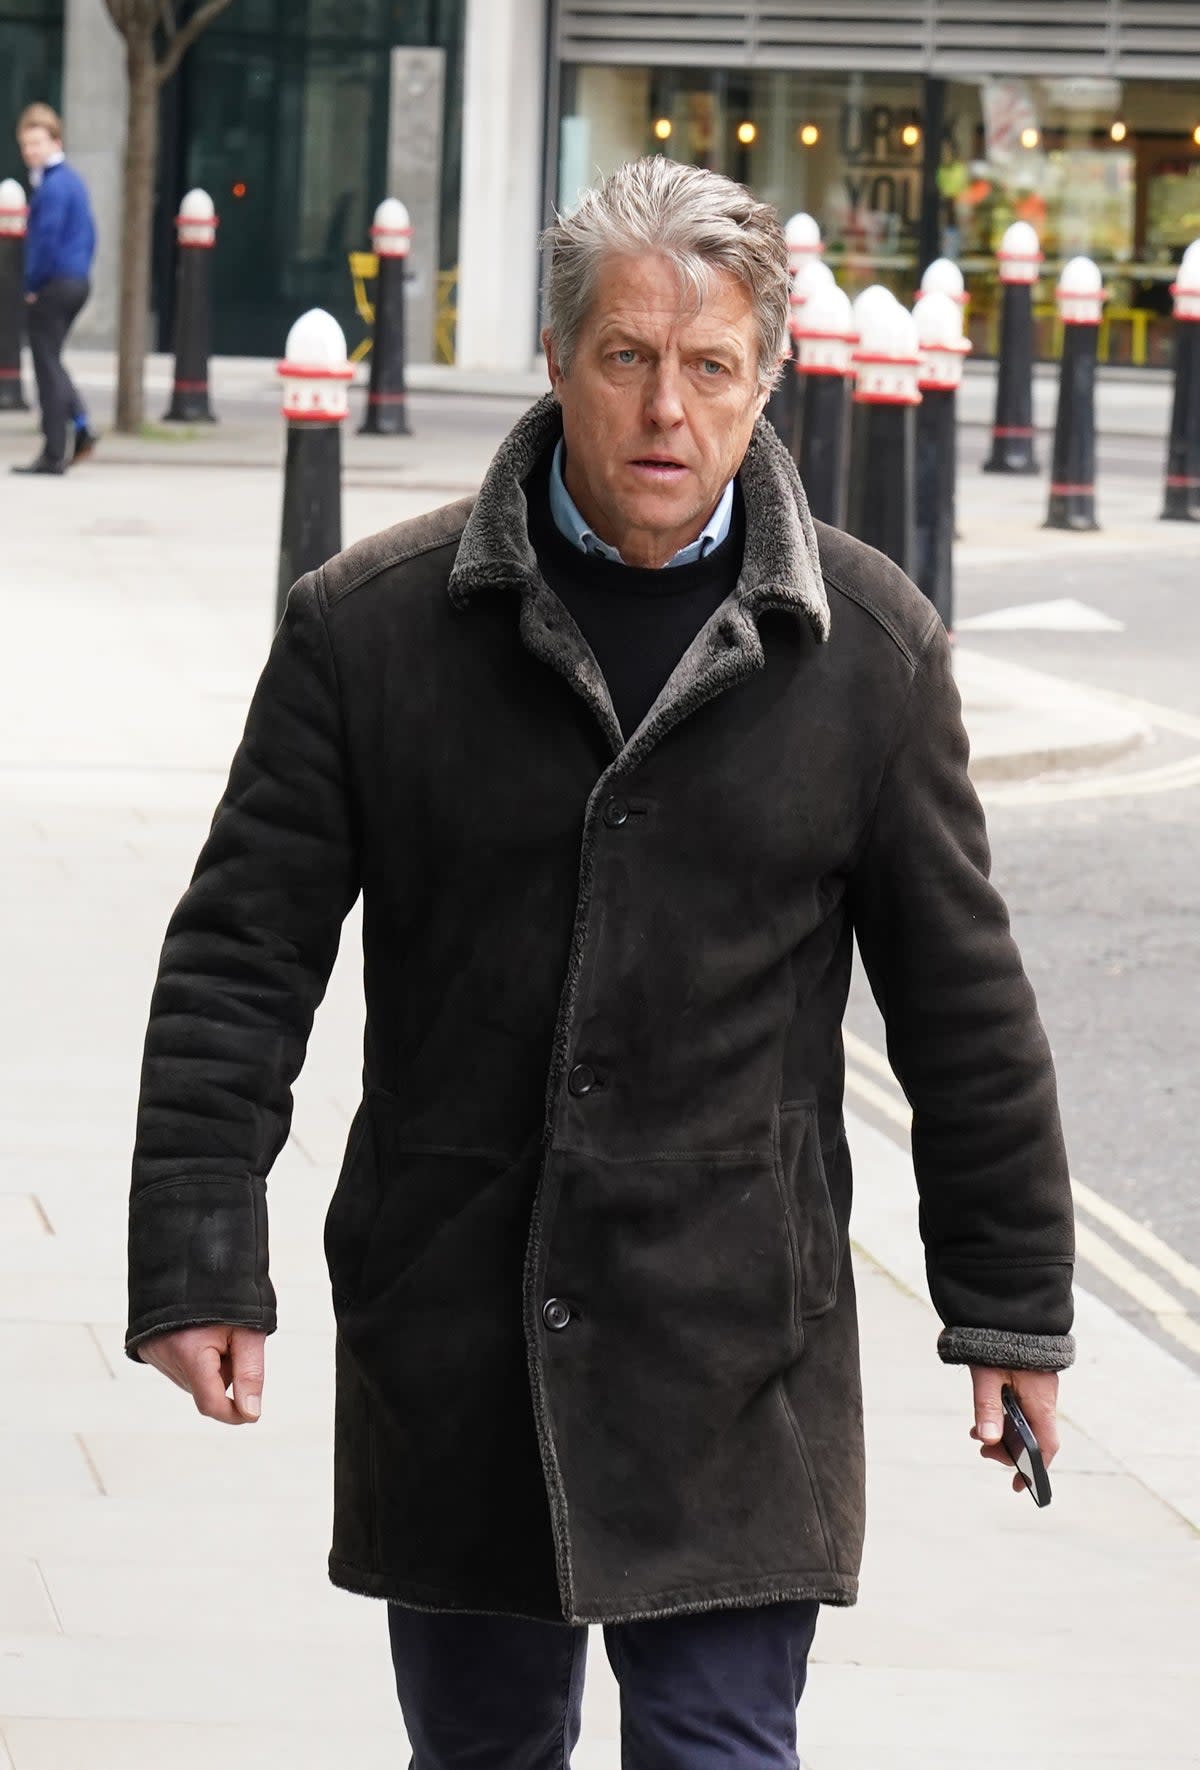 Hugh Grant is expected to attend court on Thursday (PA)